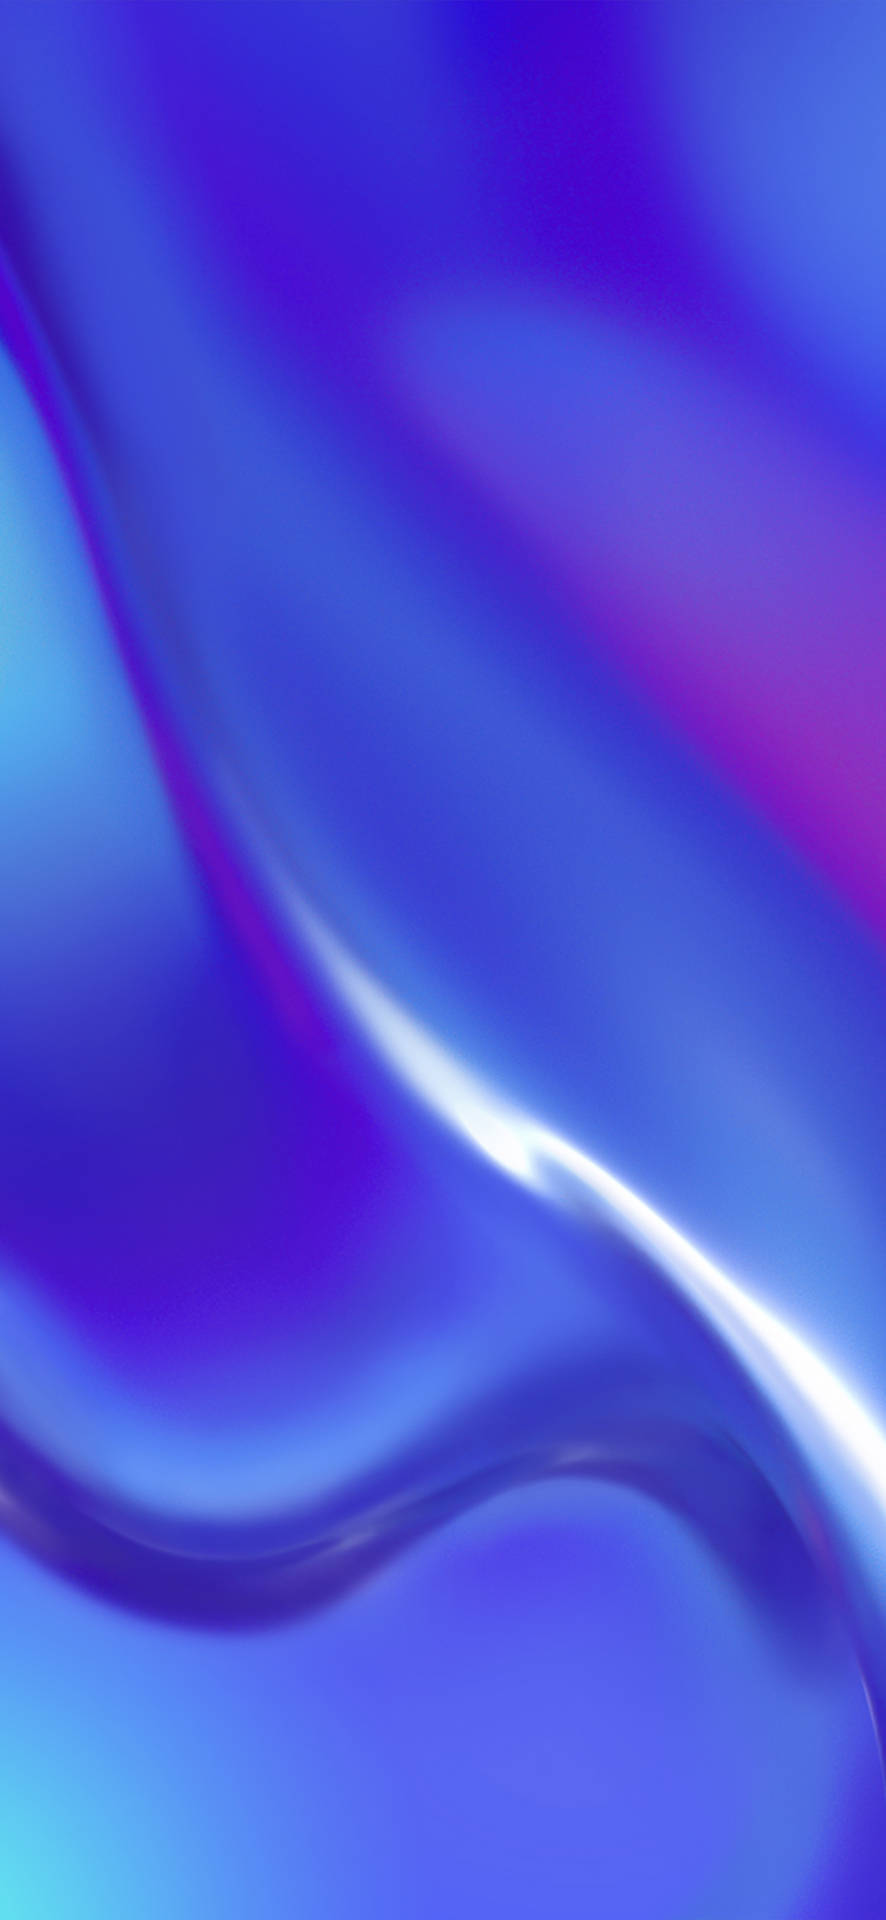 Abstract Iridescent Violet Blue Oppo A5s Wallpaper